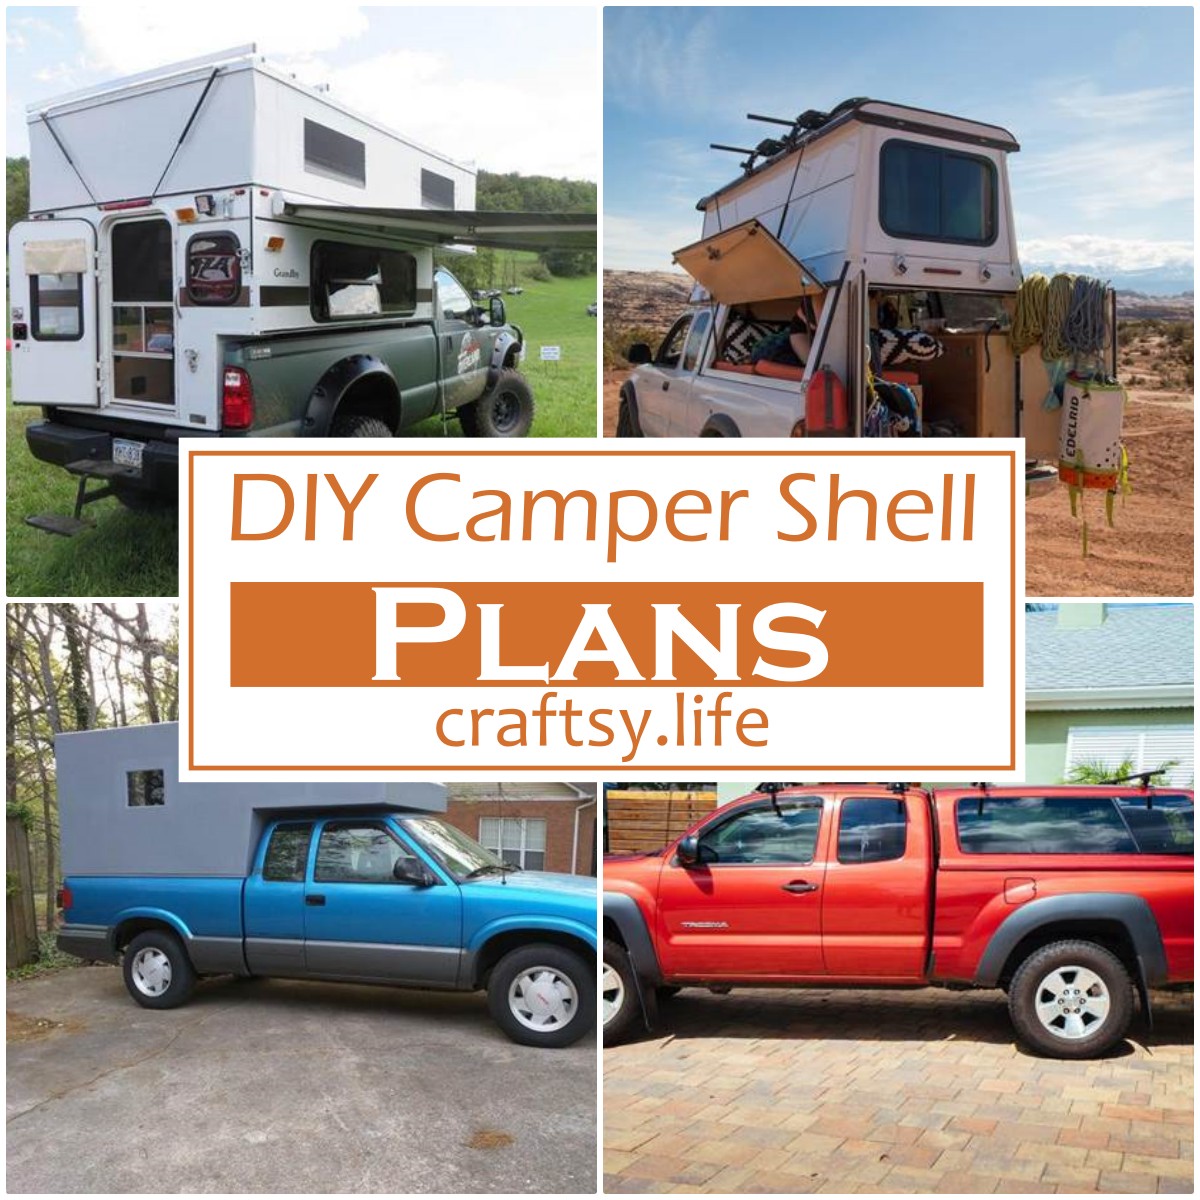 22 DIY Camper Shell Plans You Can Make Cheaply - Craftsy